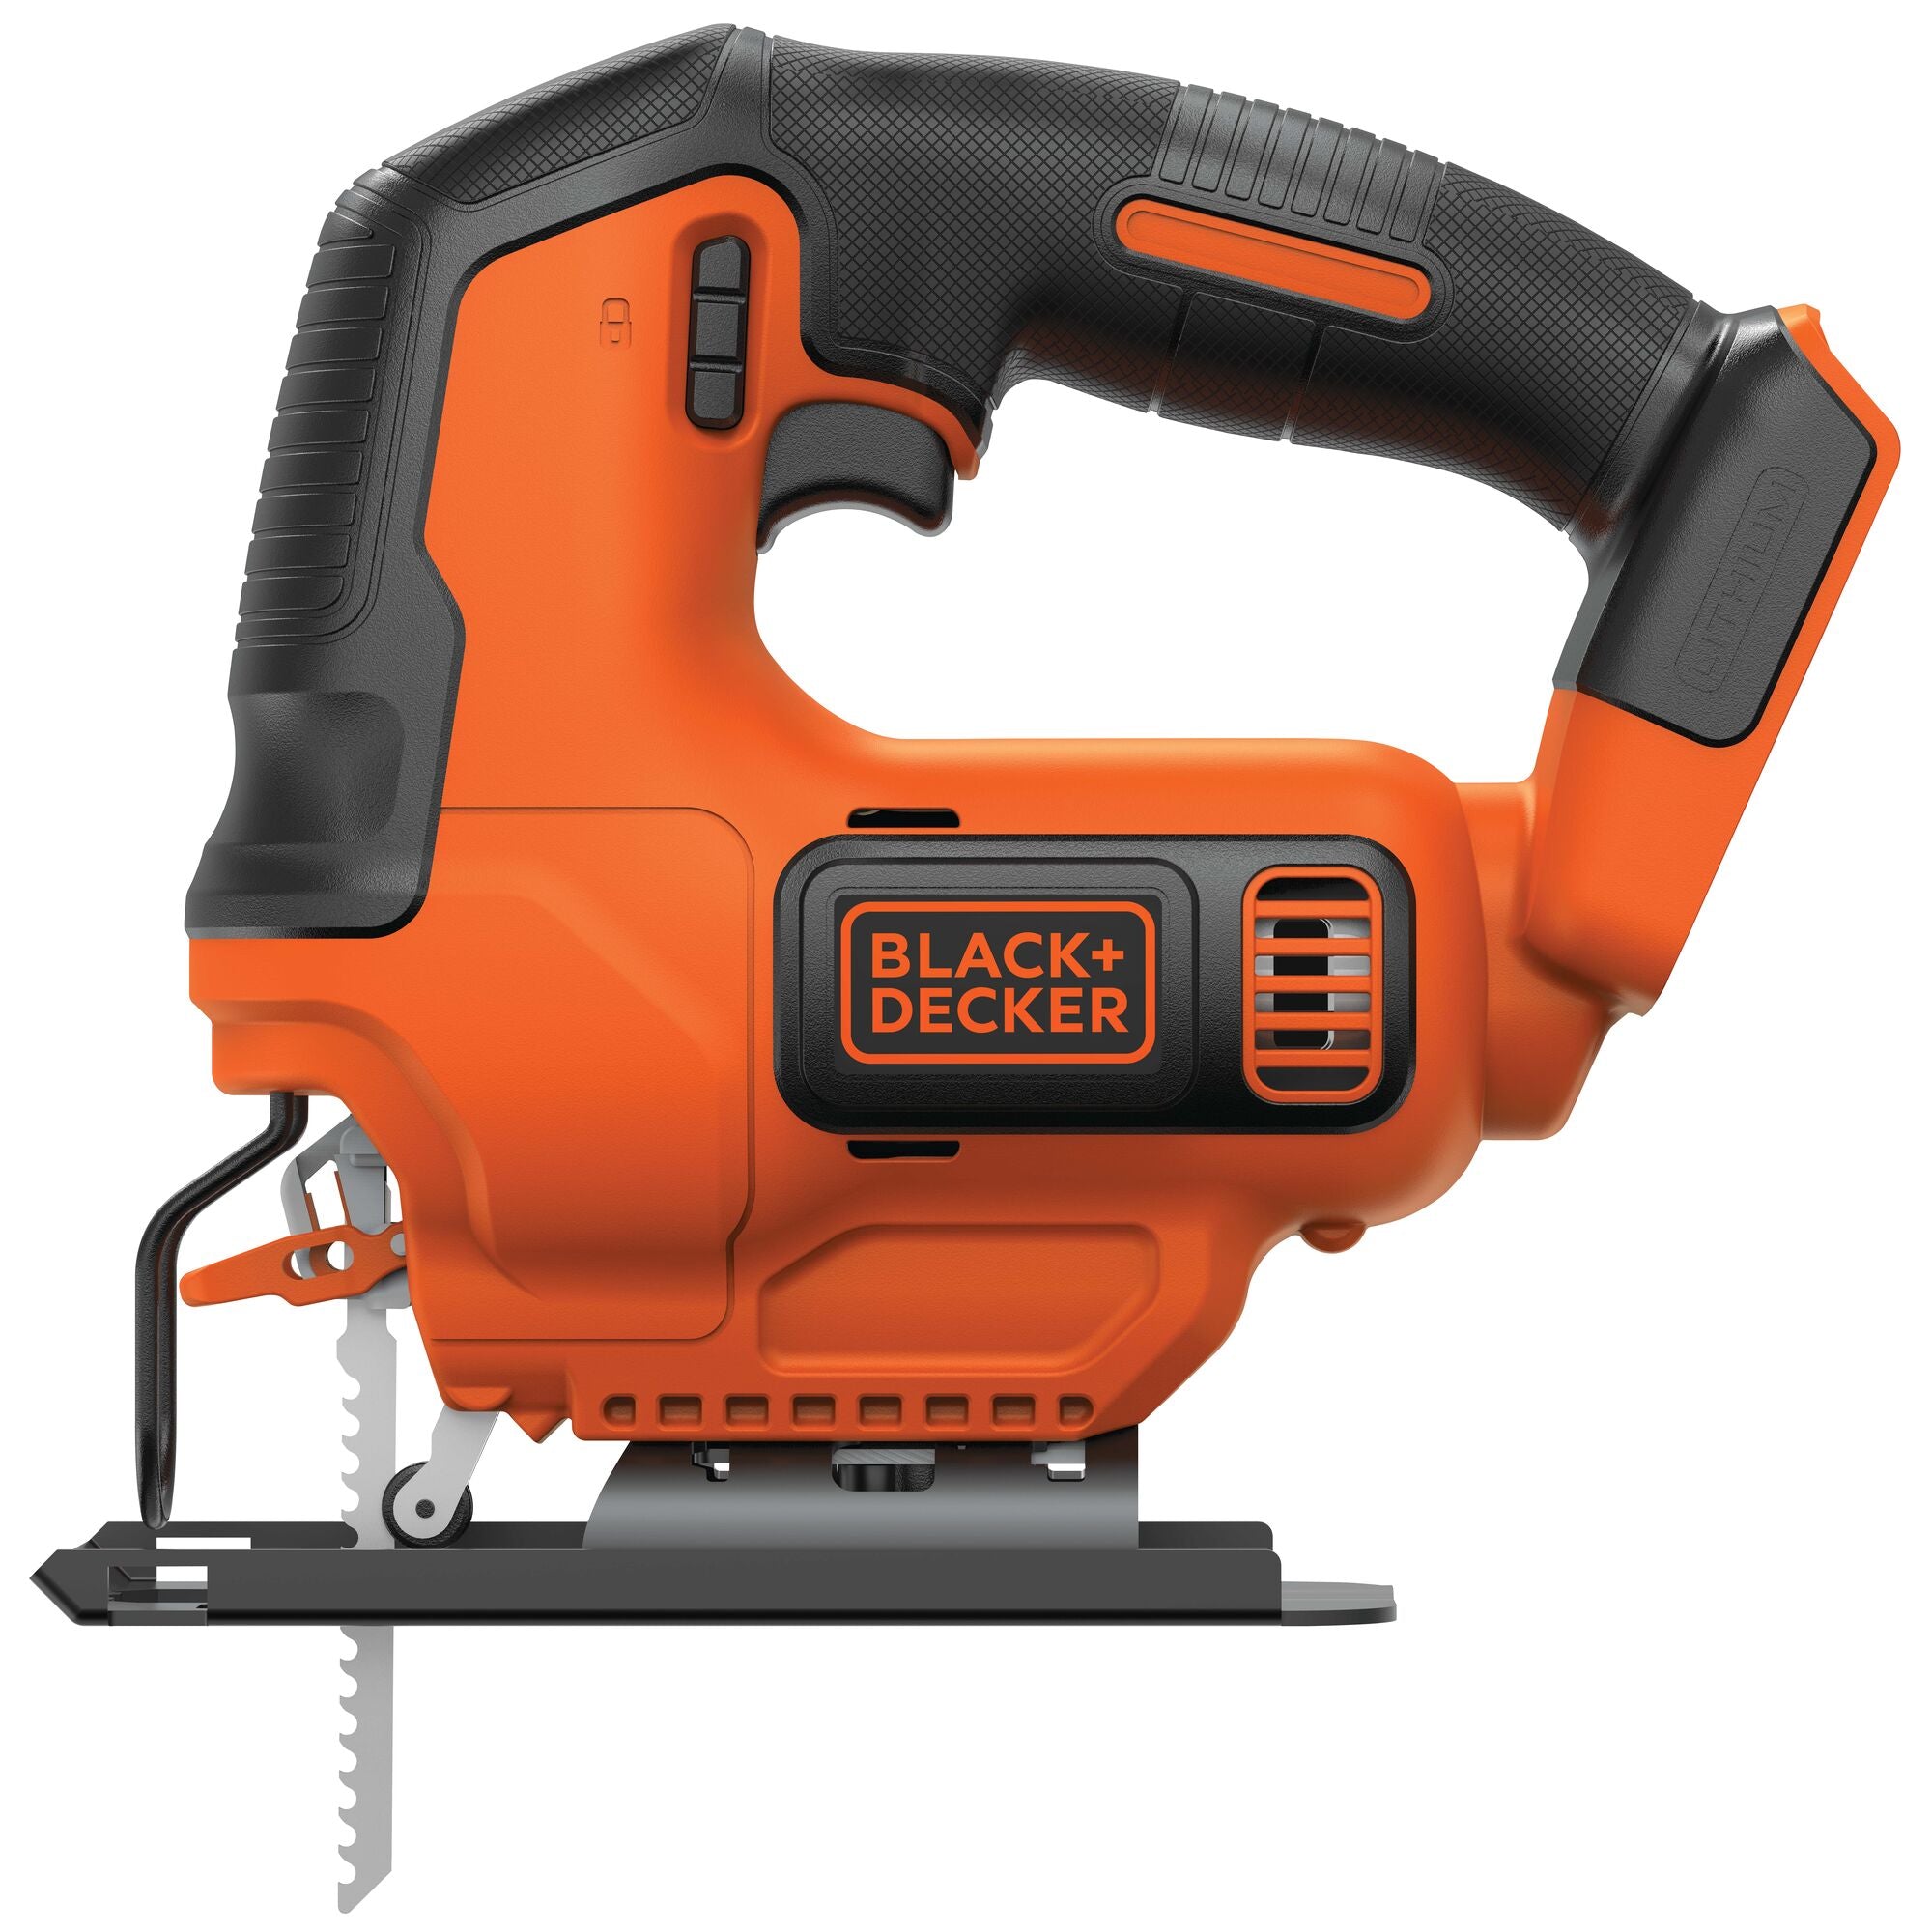 Tool free blade change feature of Cordless Jigsaw.